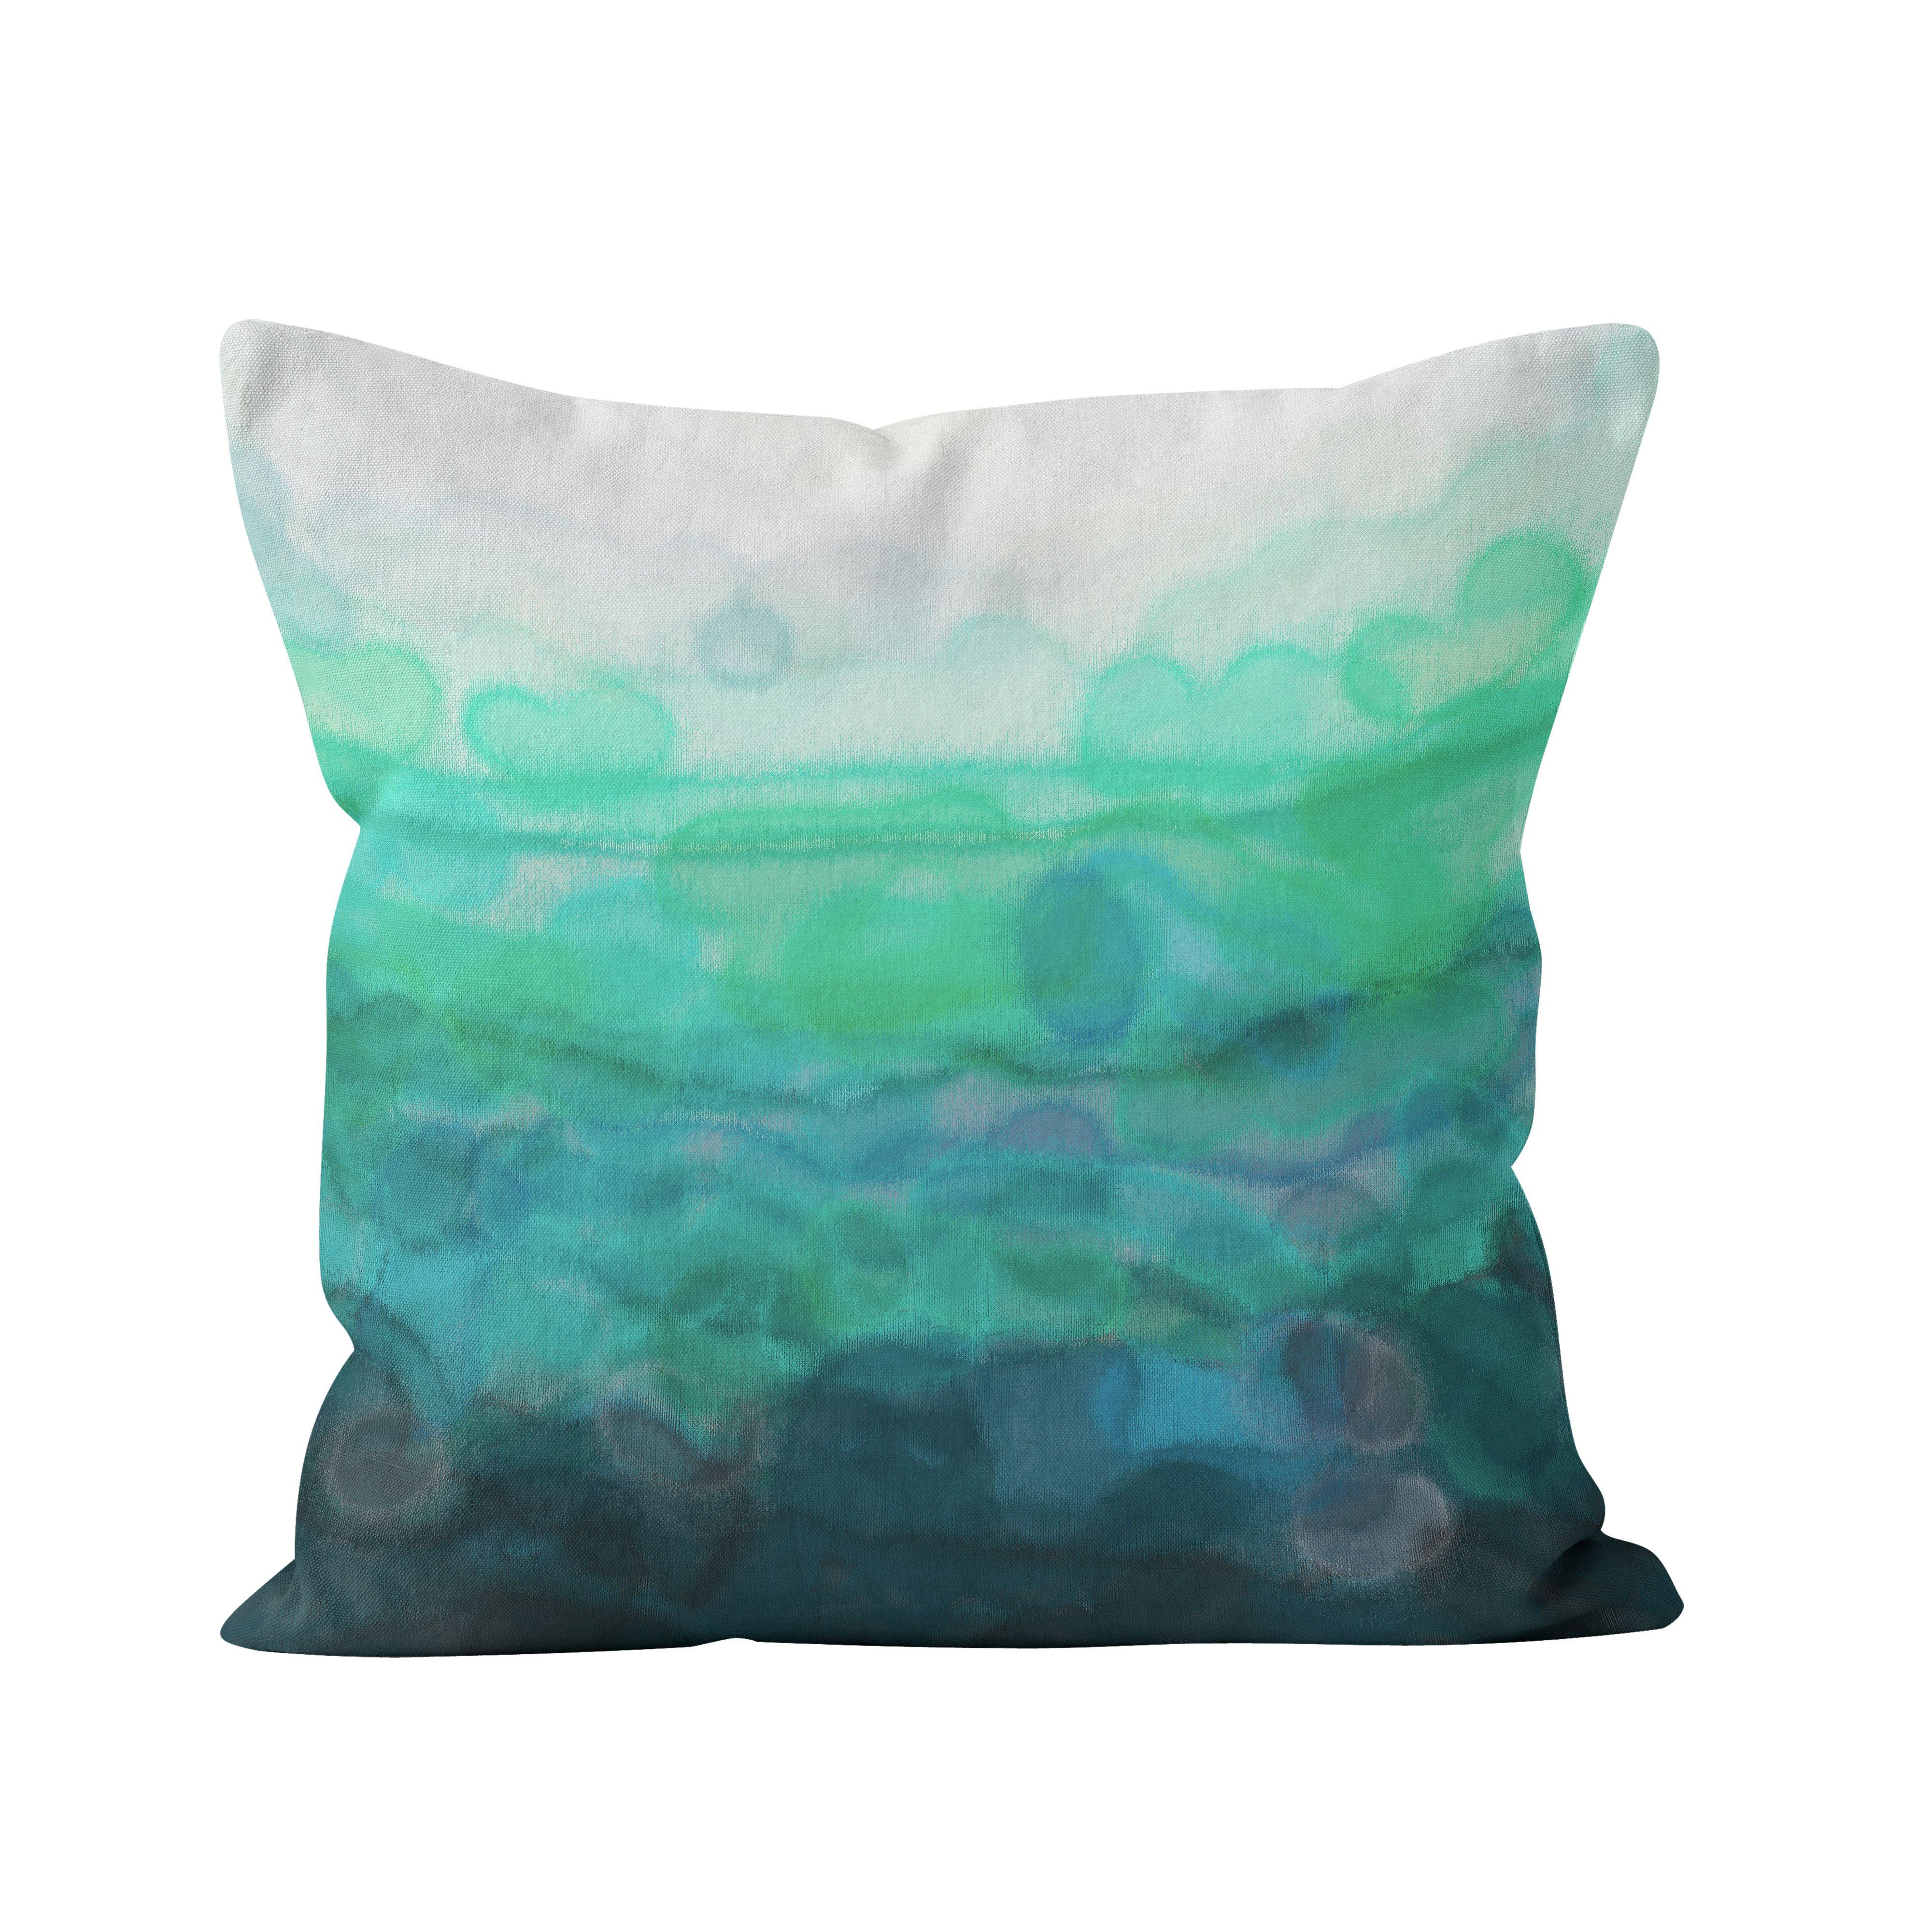 Teal 'Serenity' Cushion - Louise Mead